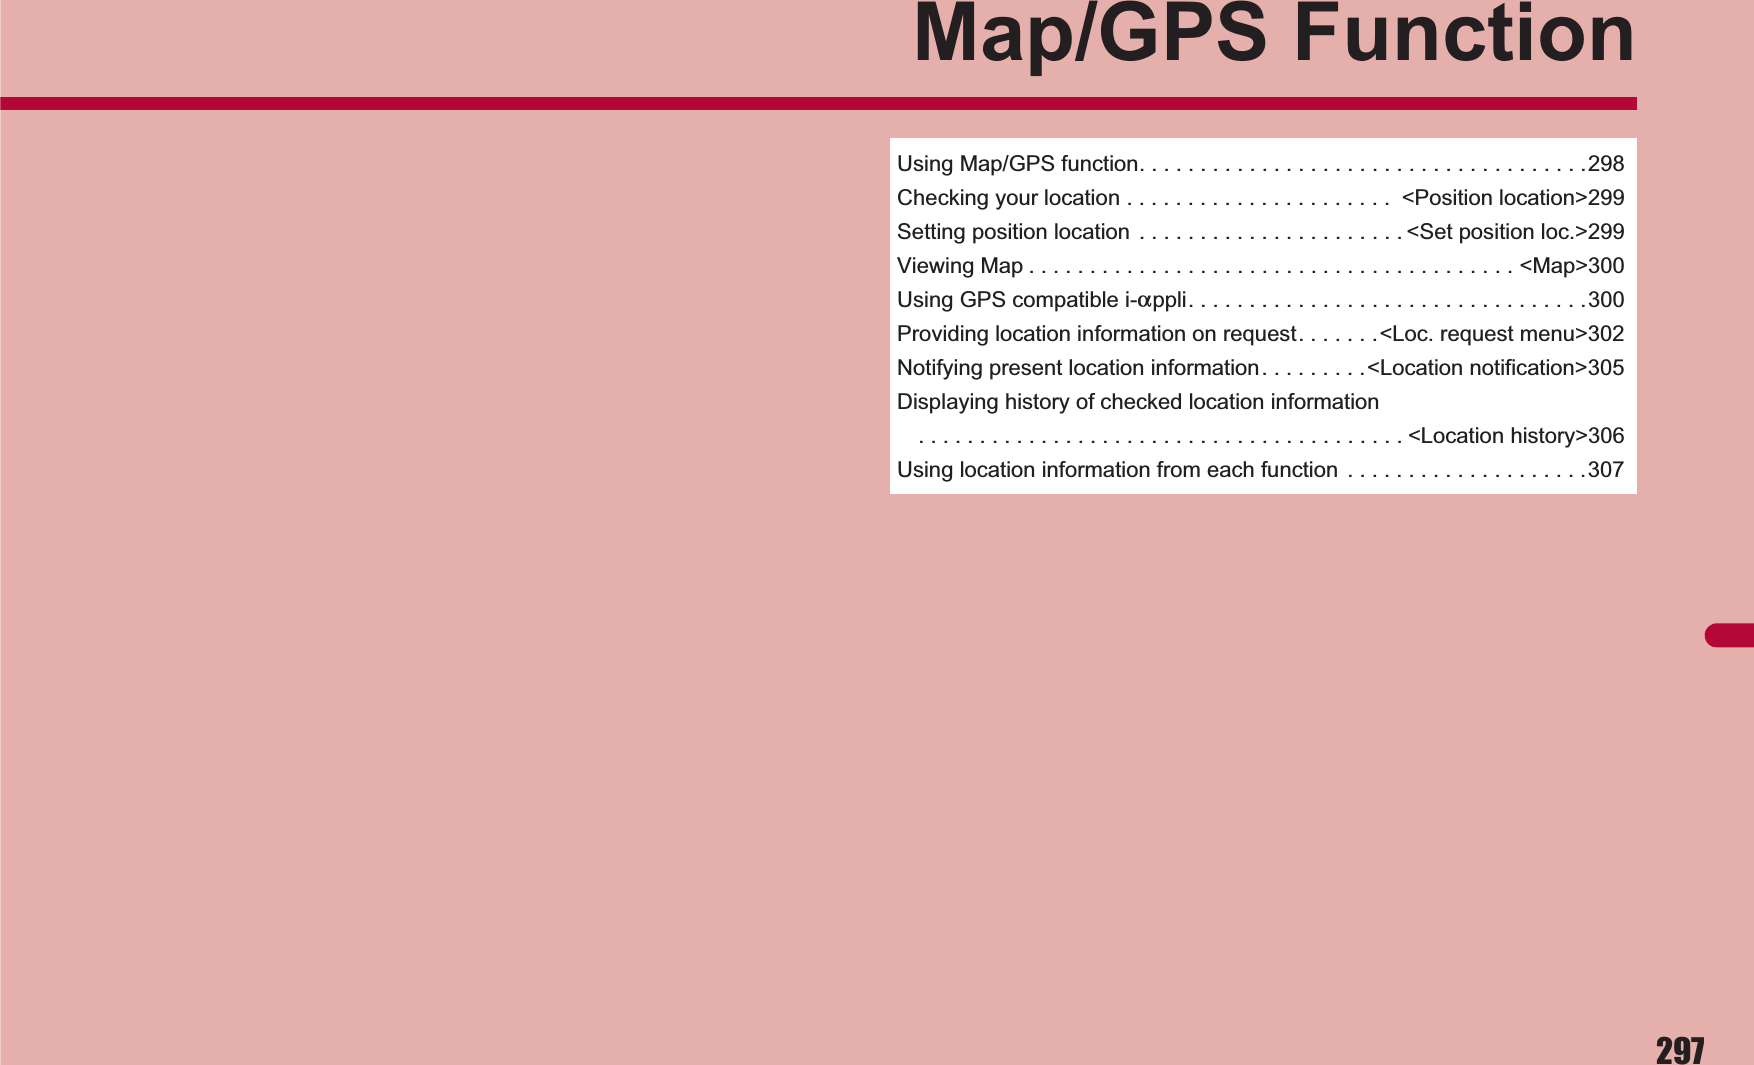 297Map/GPS FunctionUsing Map/GPS function. . . . . . . . . . . . . . . . . . . . . . . . . . . . . . . . . . . . .298Checking your location . . . . . . . . . . . . . . . . . . . . . .  &lt;Position location&gt;299Setting position location  . . . . . . . . . . . . . . . . . . . . . . &lt;Set position loc.&gt;299Viewing Map . . . . . . . . . . . . . . . . . . . . . . . . . . . . . . . . . . . . . . . . &lt;Map&gt;300Using GPS compatible i-appli. . . . . . . . . . . . . . . . . . . . . . . . . . . . . . . . .300Providing location information on request. . . . . . .&lt;Loc. request menu&gt;302Notifying present location information. . . . . . . . .&lt;Location notification&gt;305Displaying history of checked location information. . . . . . . . . . . . . . . . . . . . . . . . . . . . . . . . . . . . . . . . &lt;Location history&gt;306Using location information from each function  . . . . . . . . . . . . . . . . . . . .307